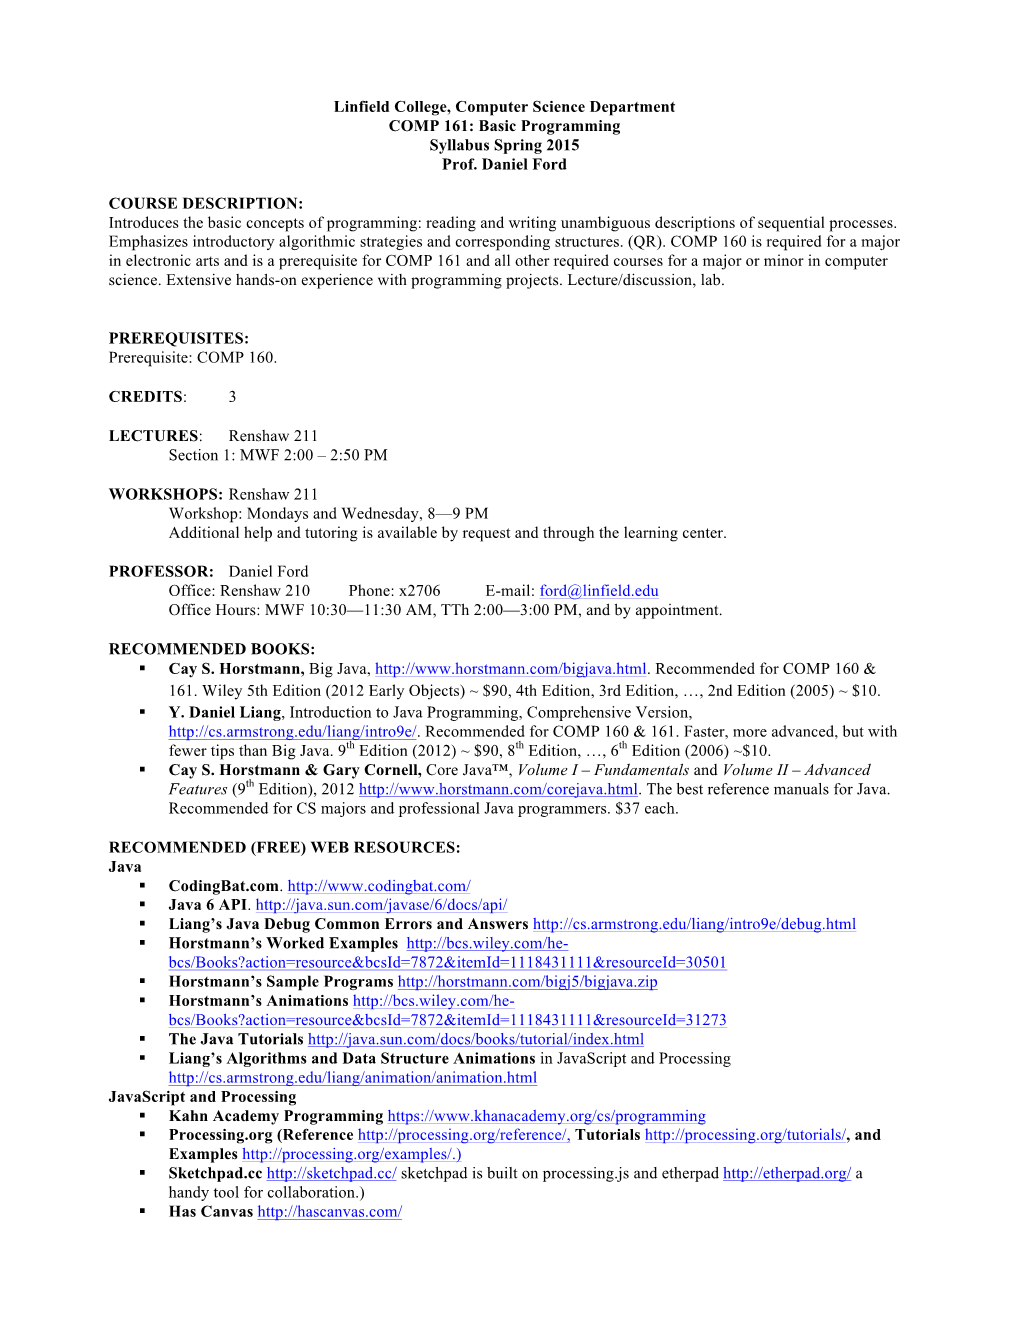 Linfield College, Computer Science Department COMP 161: Basic Programming Syllabus Spring 2015 Prof